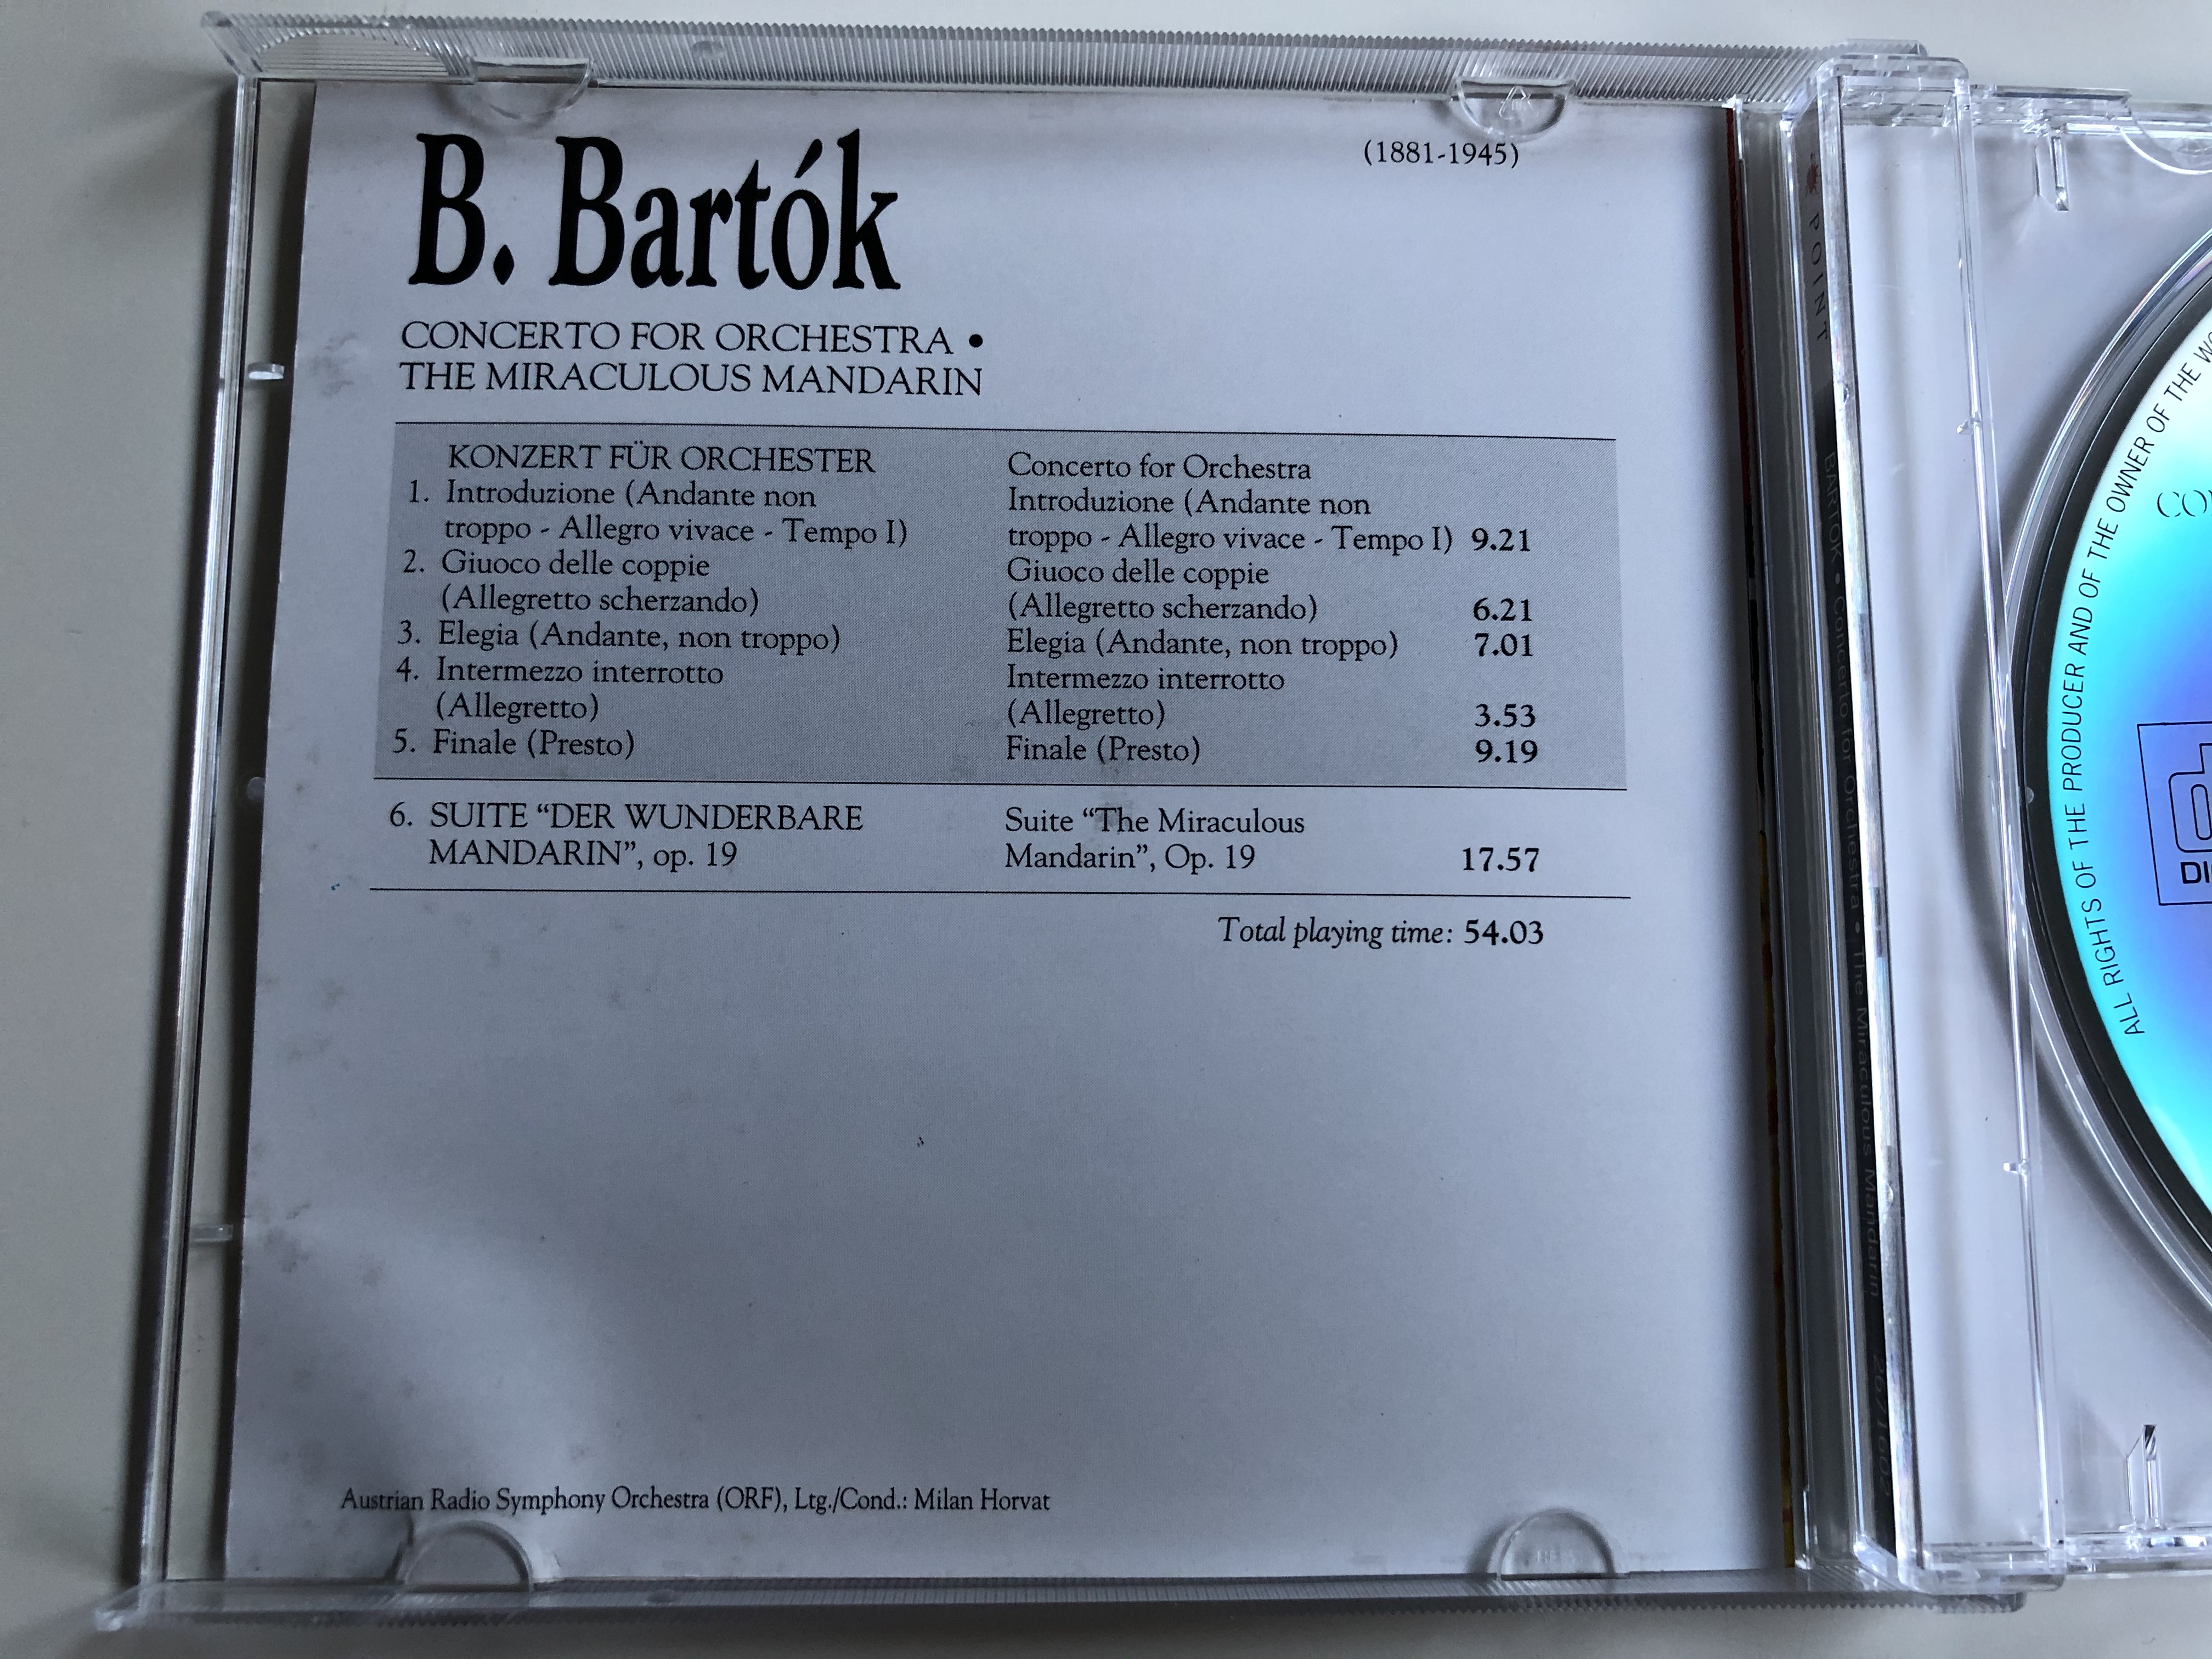 bart-k-concerto-for-orchestra-the-miraculous-mandarin-austrian-radio-symphony-orchestra-orf-conducted-milan-horvat-point-classics-audio-cd-1994-2671602-2-.jpg